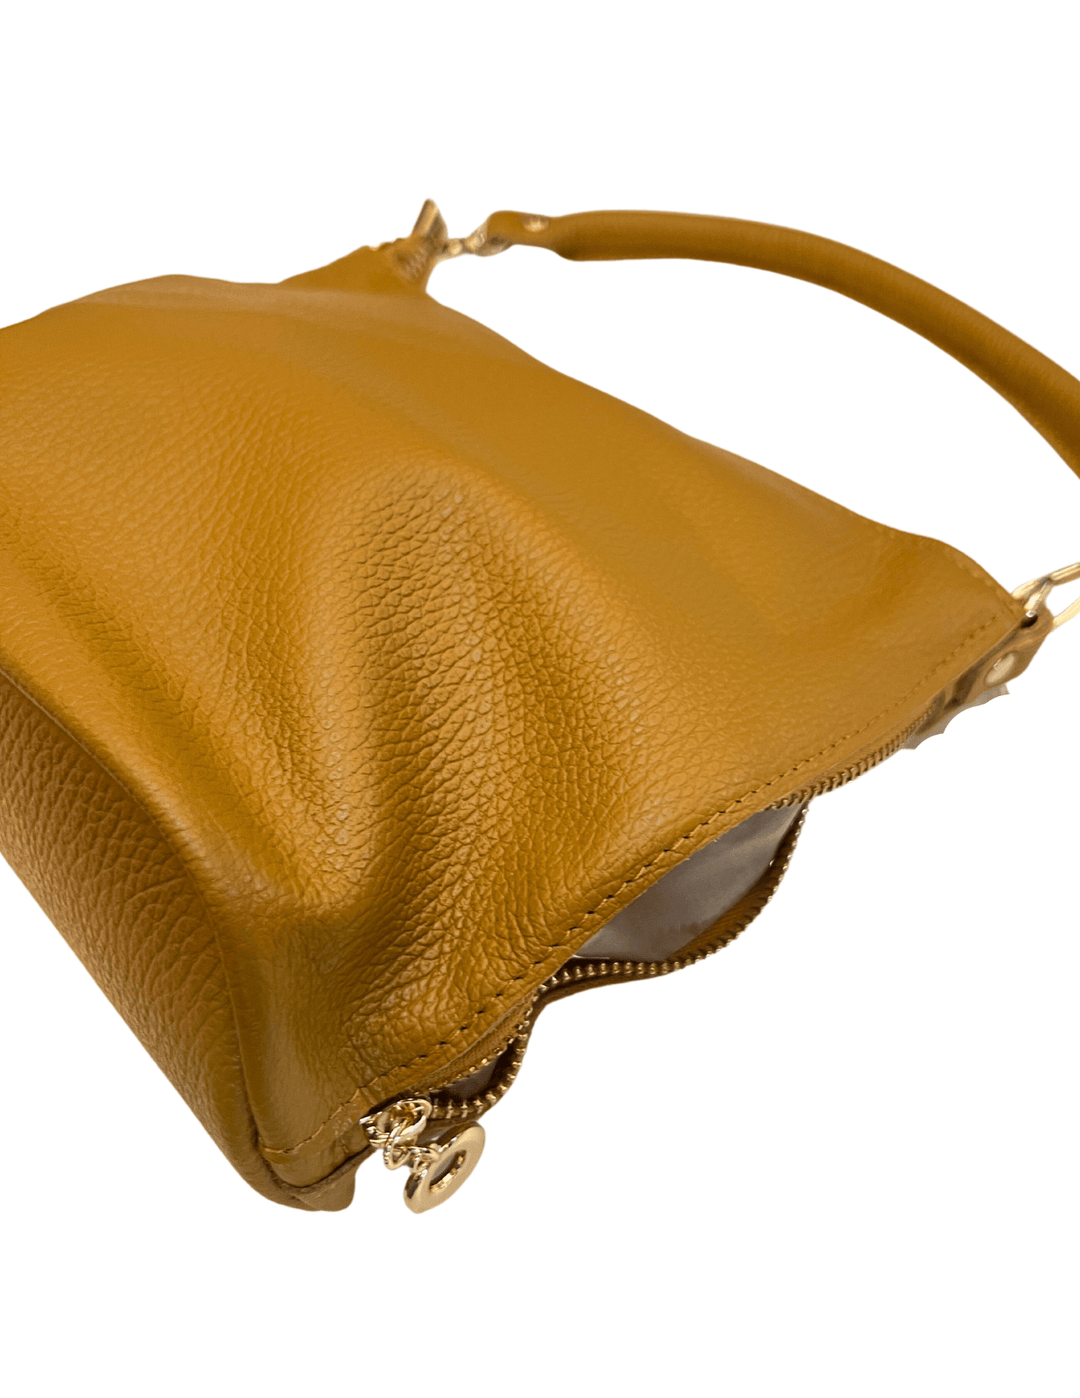 leather bucket bag with crossbody strap tres chic boutique womens gift idea mustard